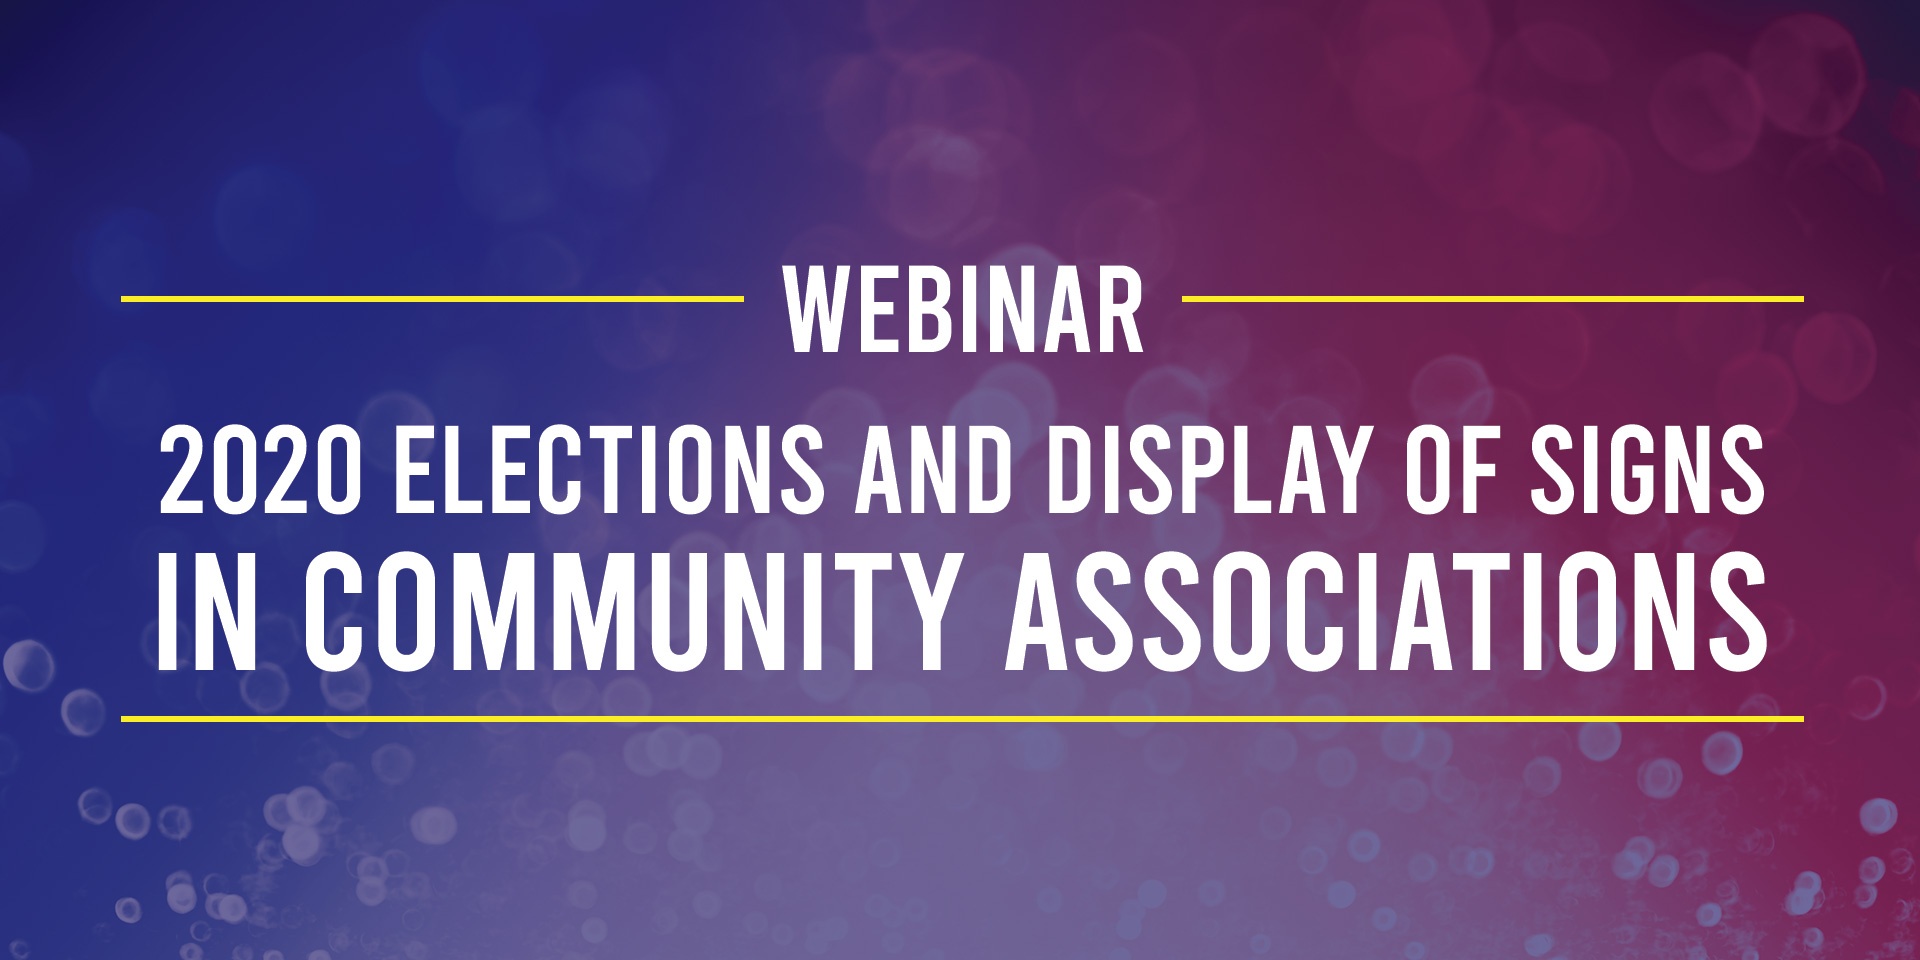 Webinar 2020 Elections and Display of Signs in Community Associations